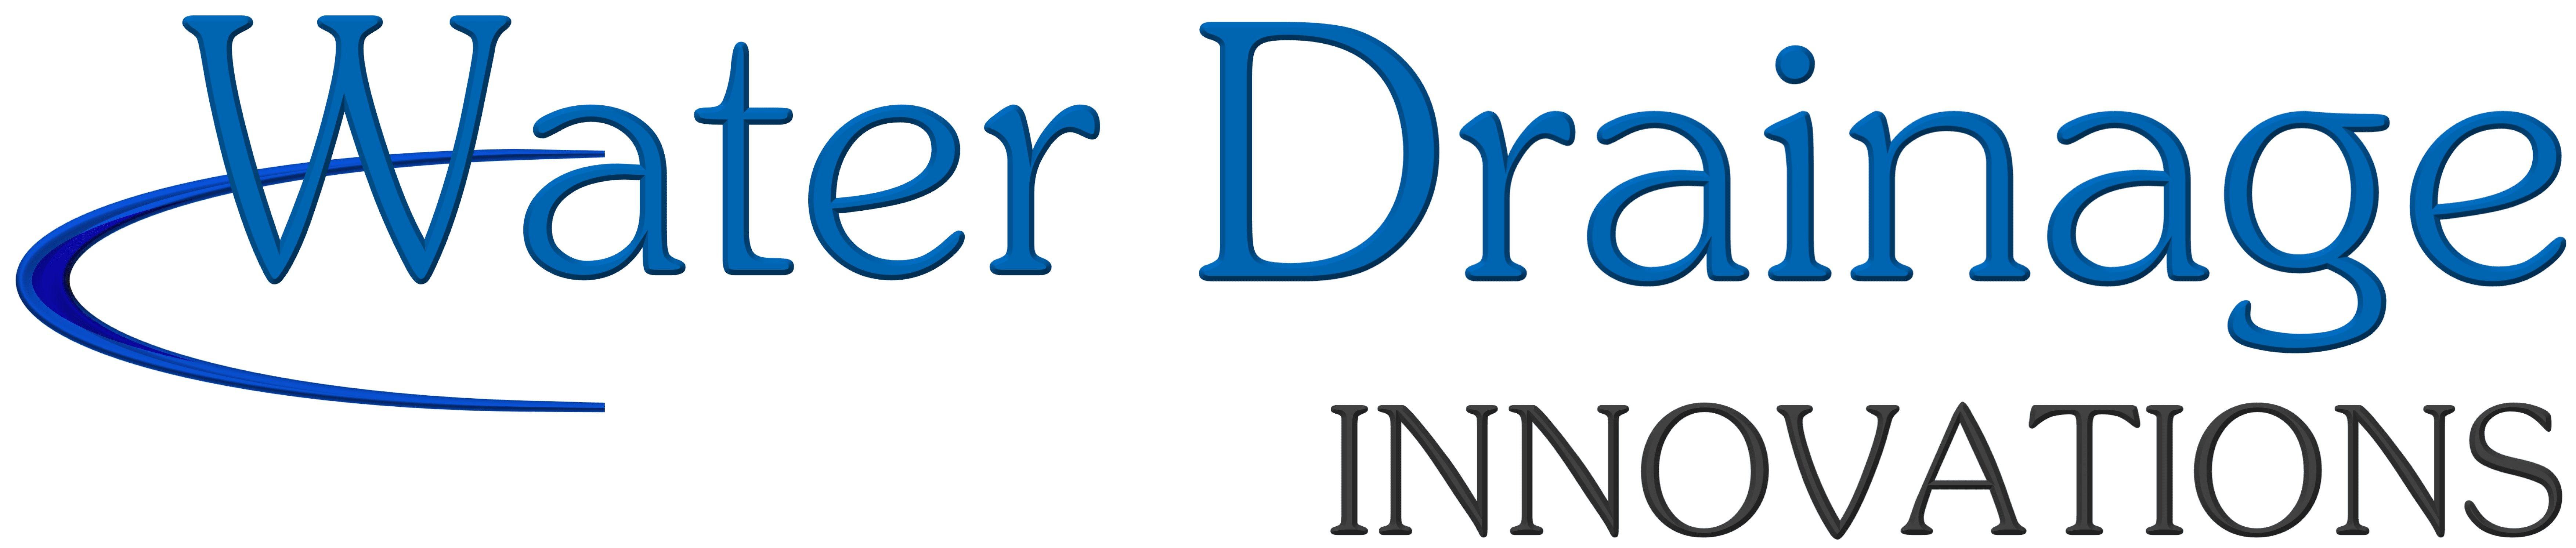 Water Drainage Innovations Logo